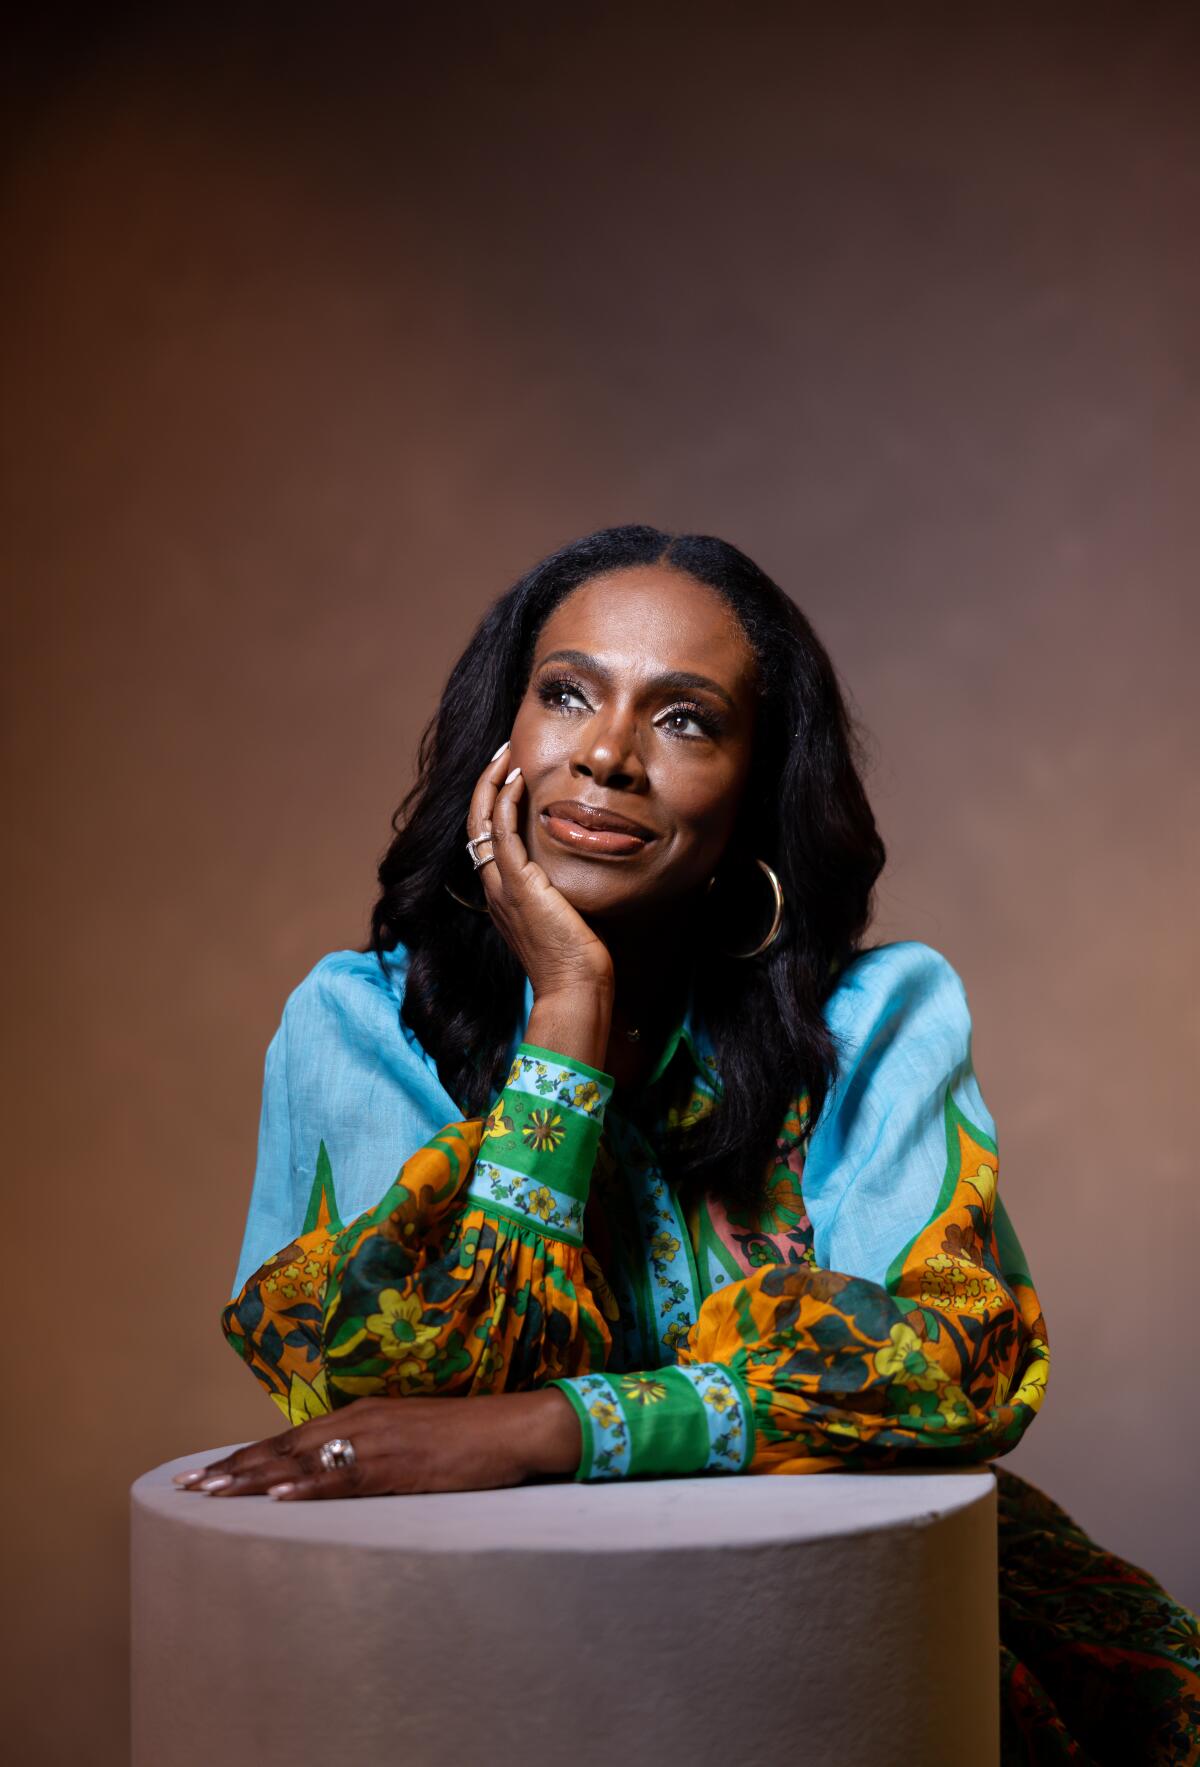 Sheryl Lee Ralph in a turquoise blouse with patterned sleeves and her chin resting on one hand